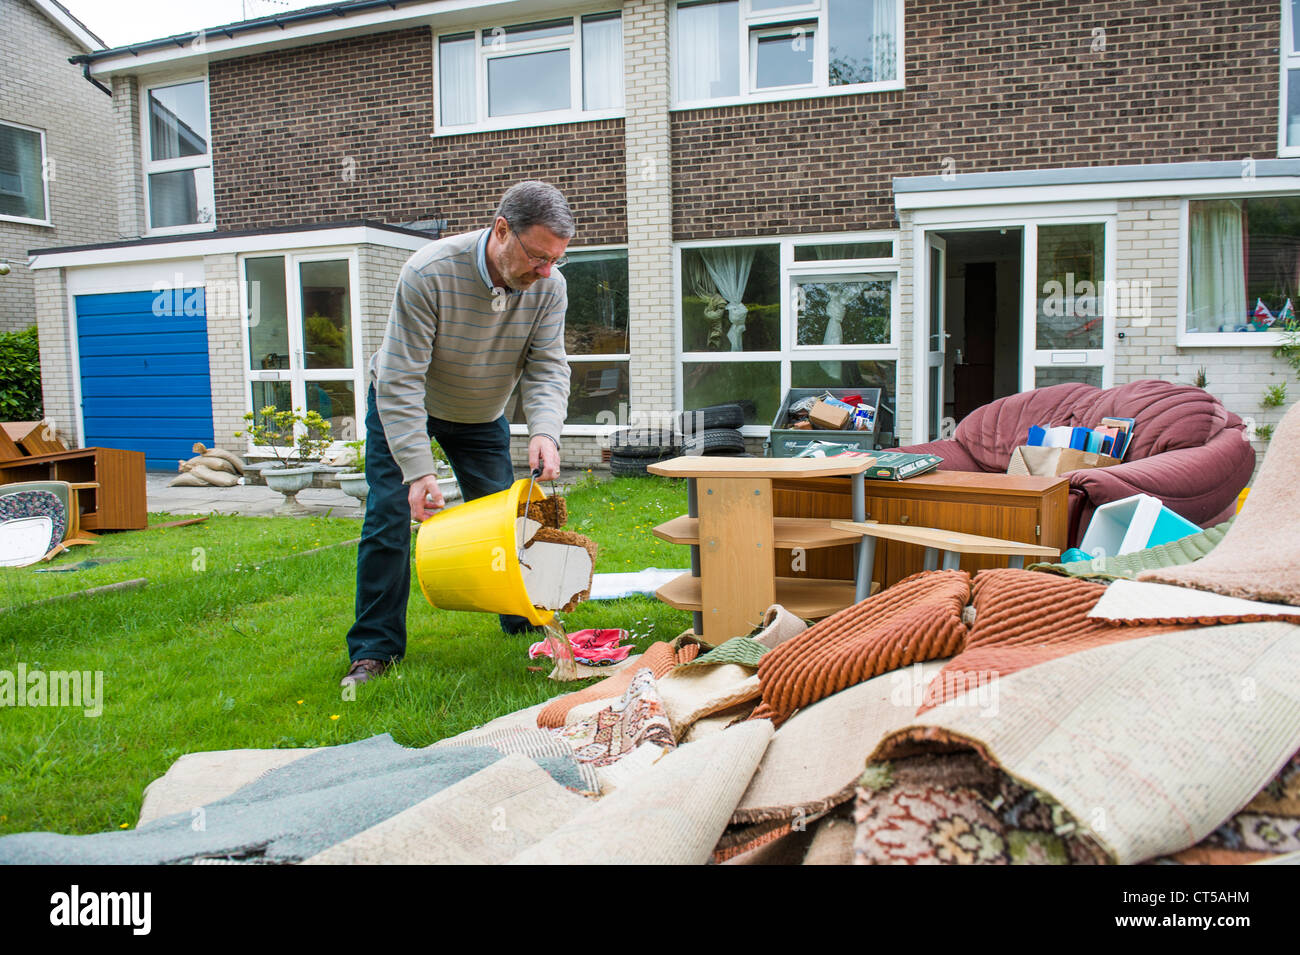 A man works clearing the damage done to his home Aberystwyth UK by floods June 2012 - dumping possessions on lawn outside house Stock Photo